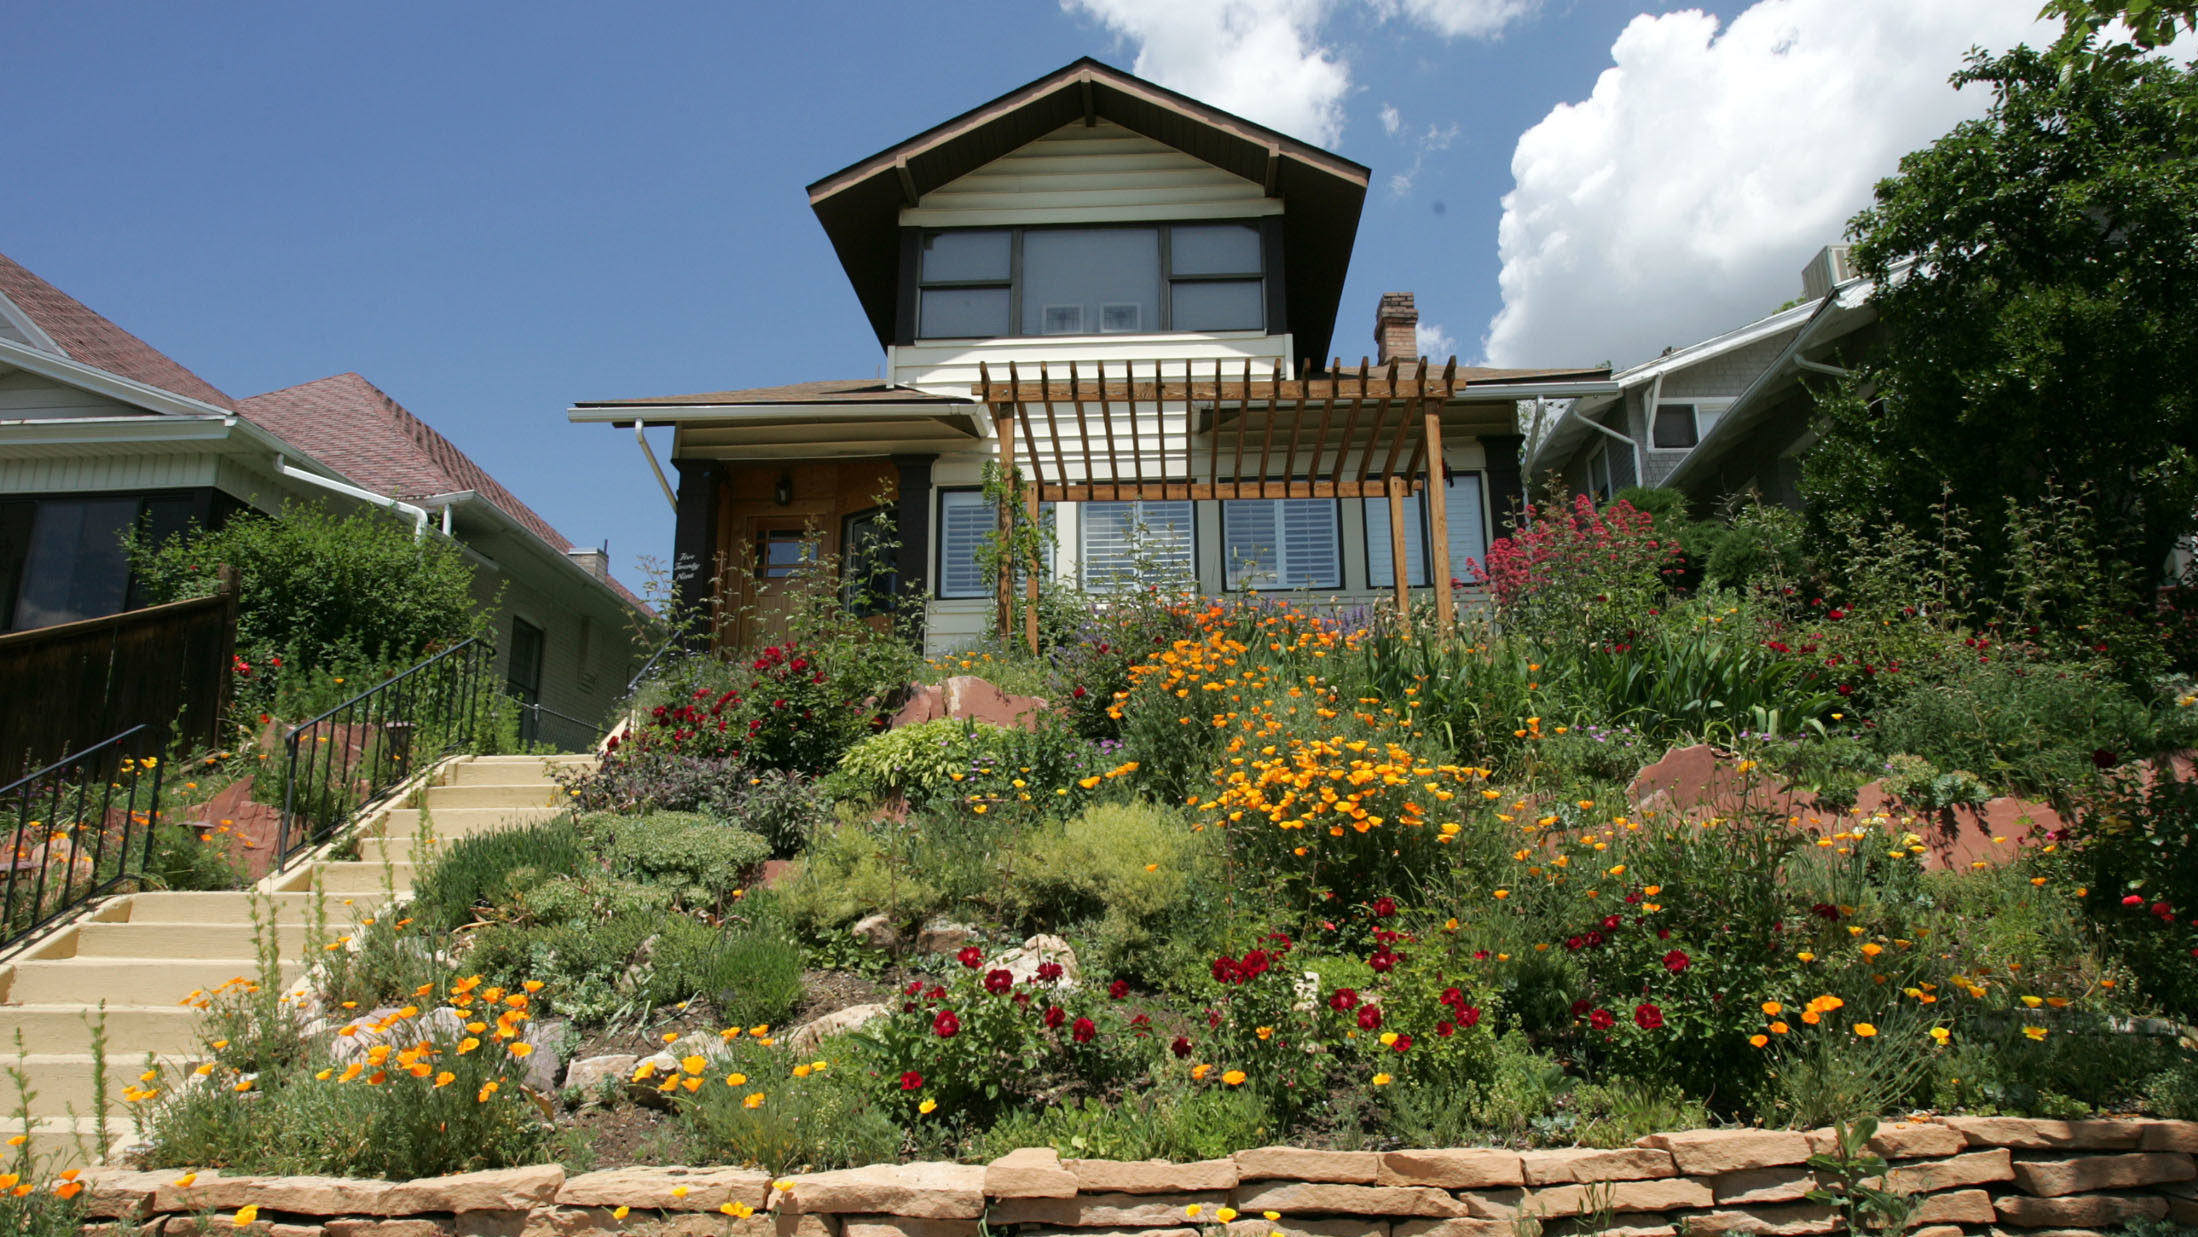 Choosing materials to construct your raised beds - KSLNewsRadio